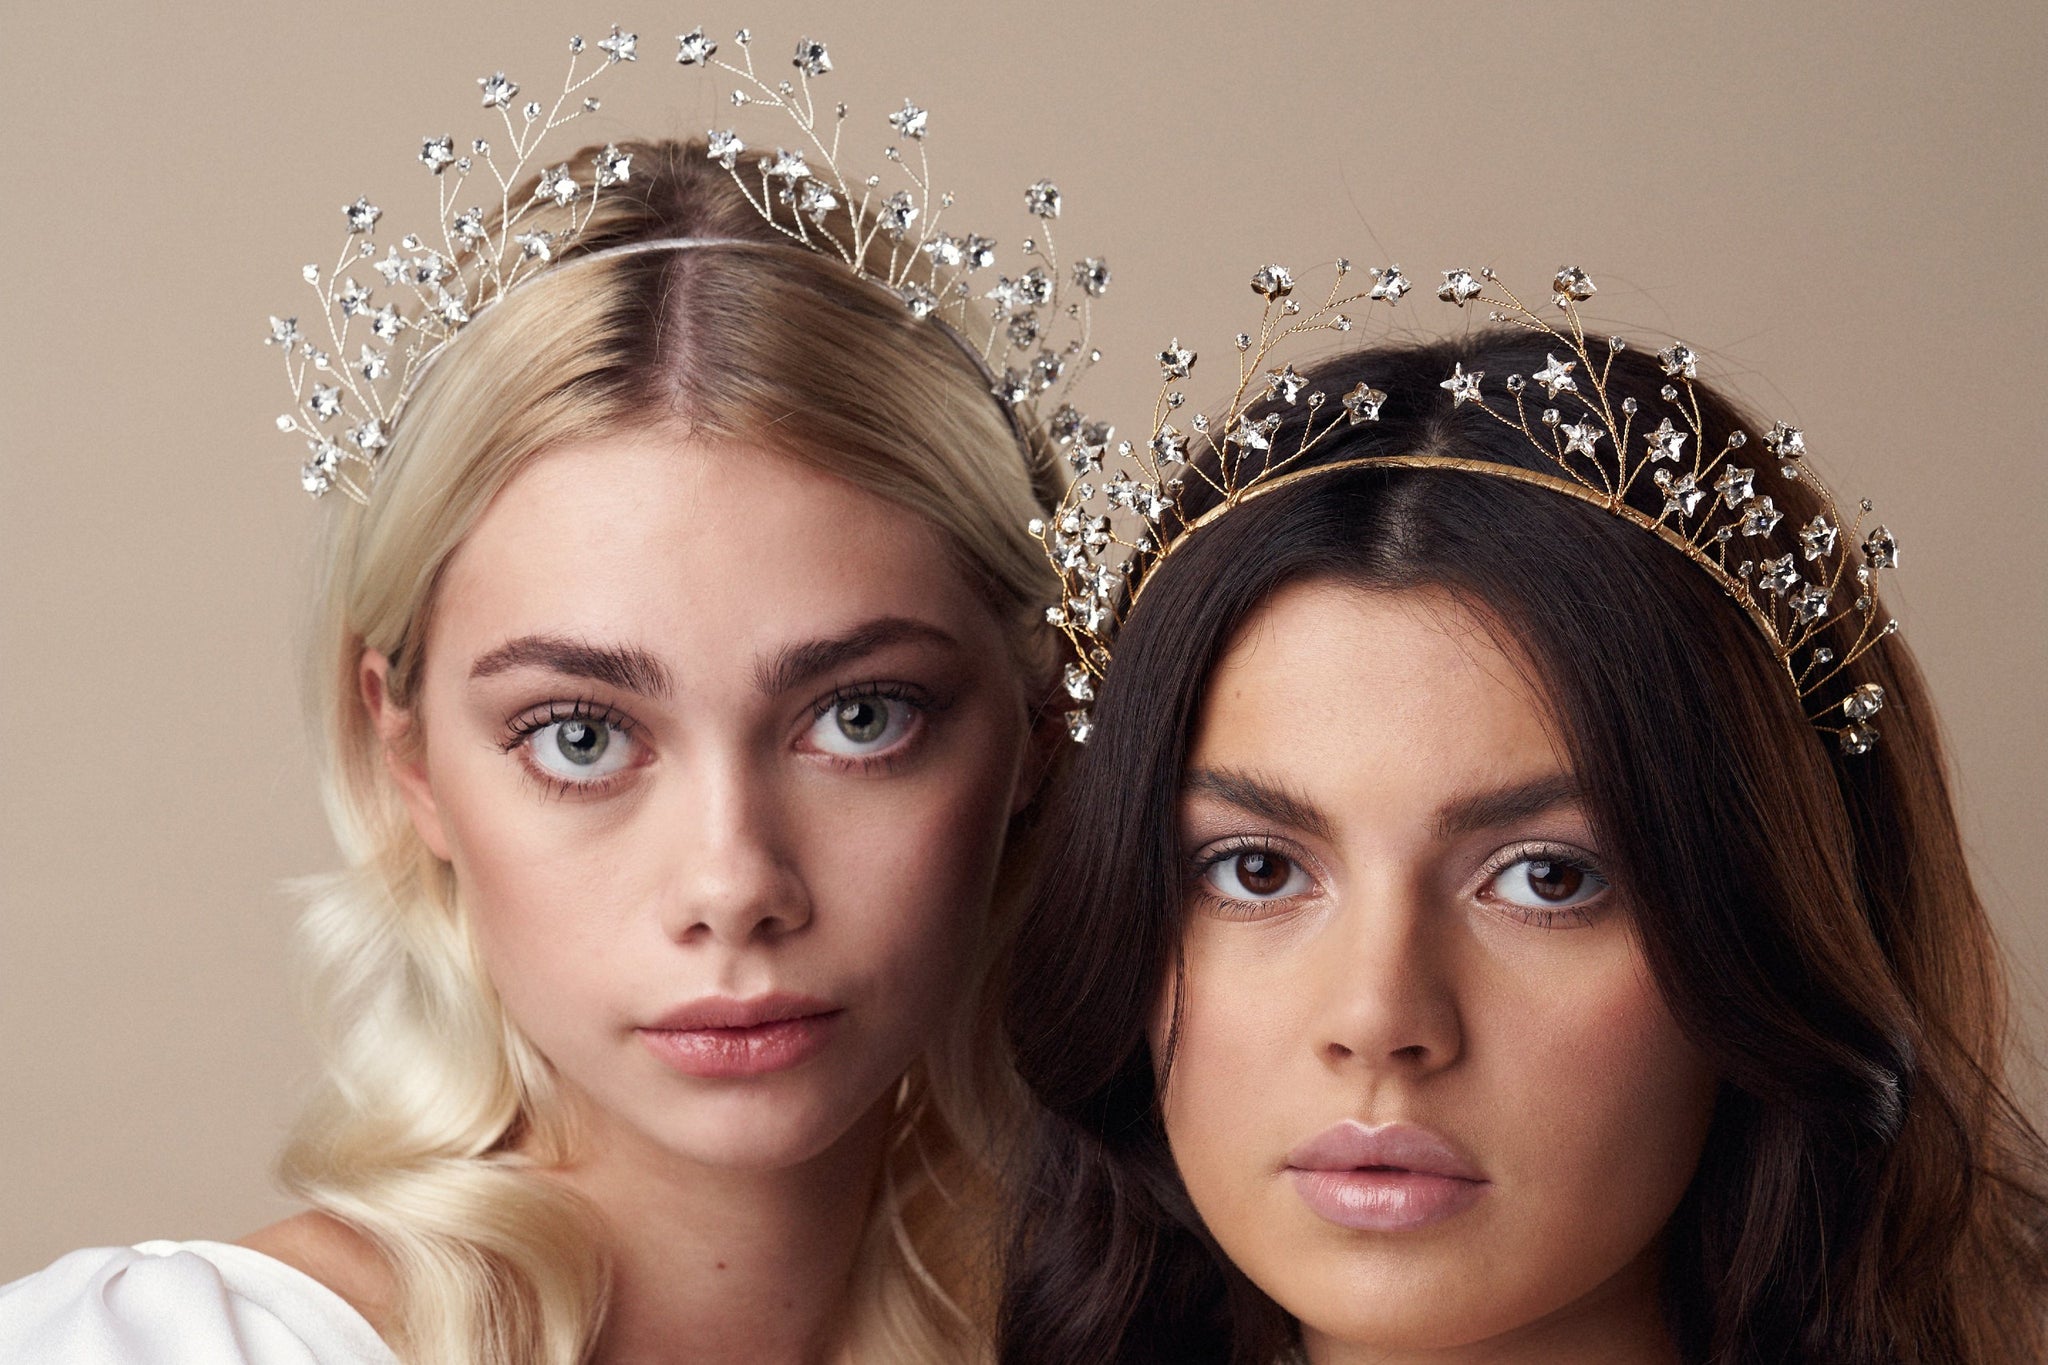 Celestial star crown in gold and silver - a statement crown with adjustable height worn by two models